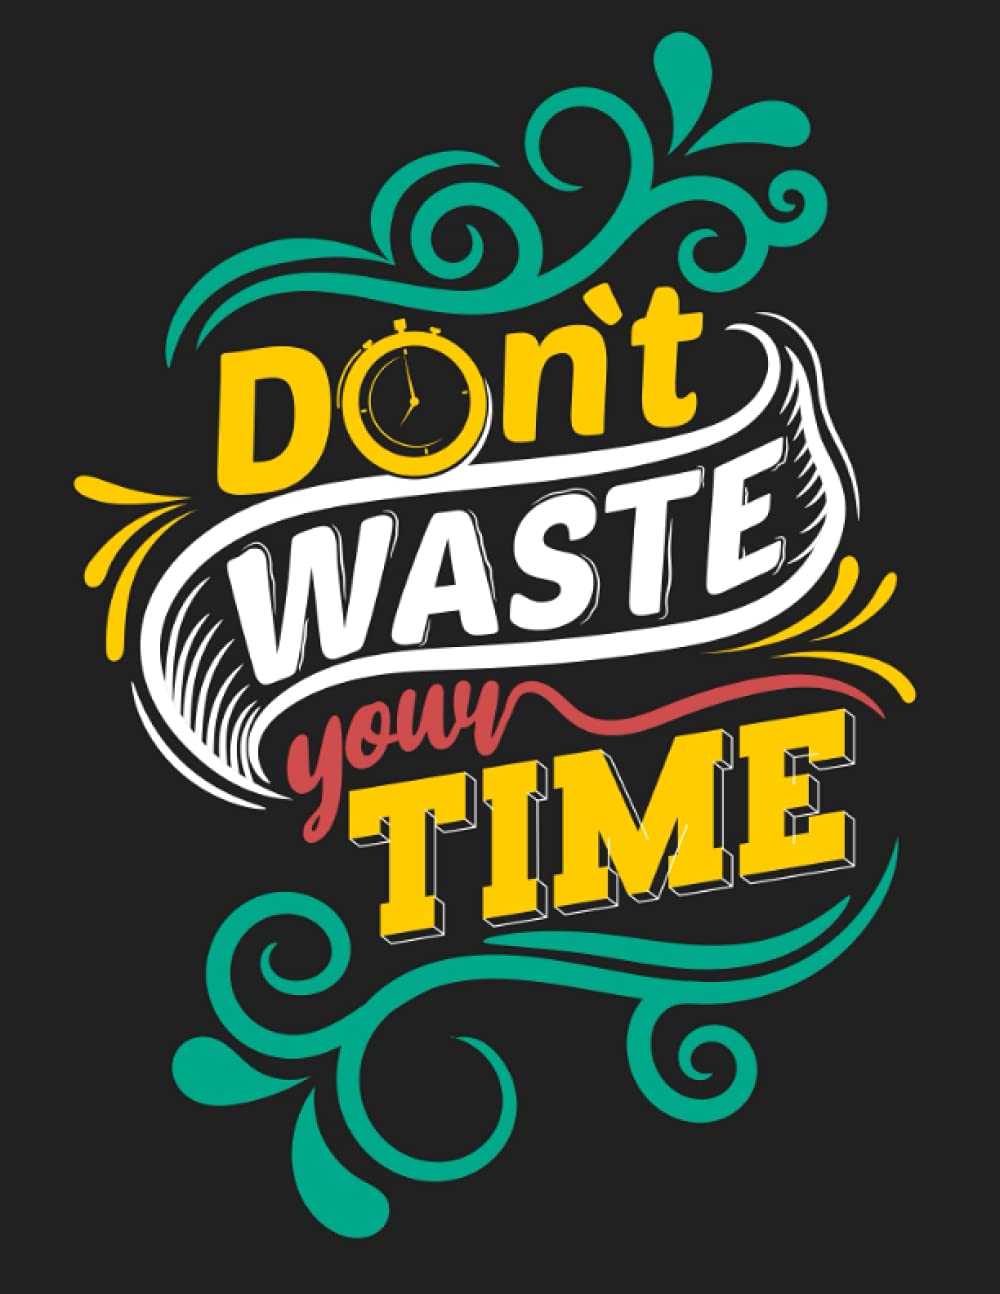 Buy Don't Waste Your Time: Self Care & Wellness Journal Gift for Woman Motivational Quotes 8.5 x 11 Inches 102 Pages Book Online at Low Prices in India. Don't Waste Your